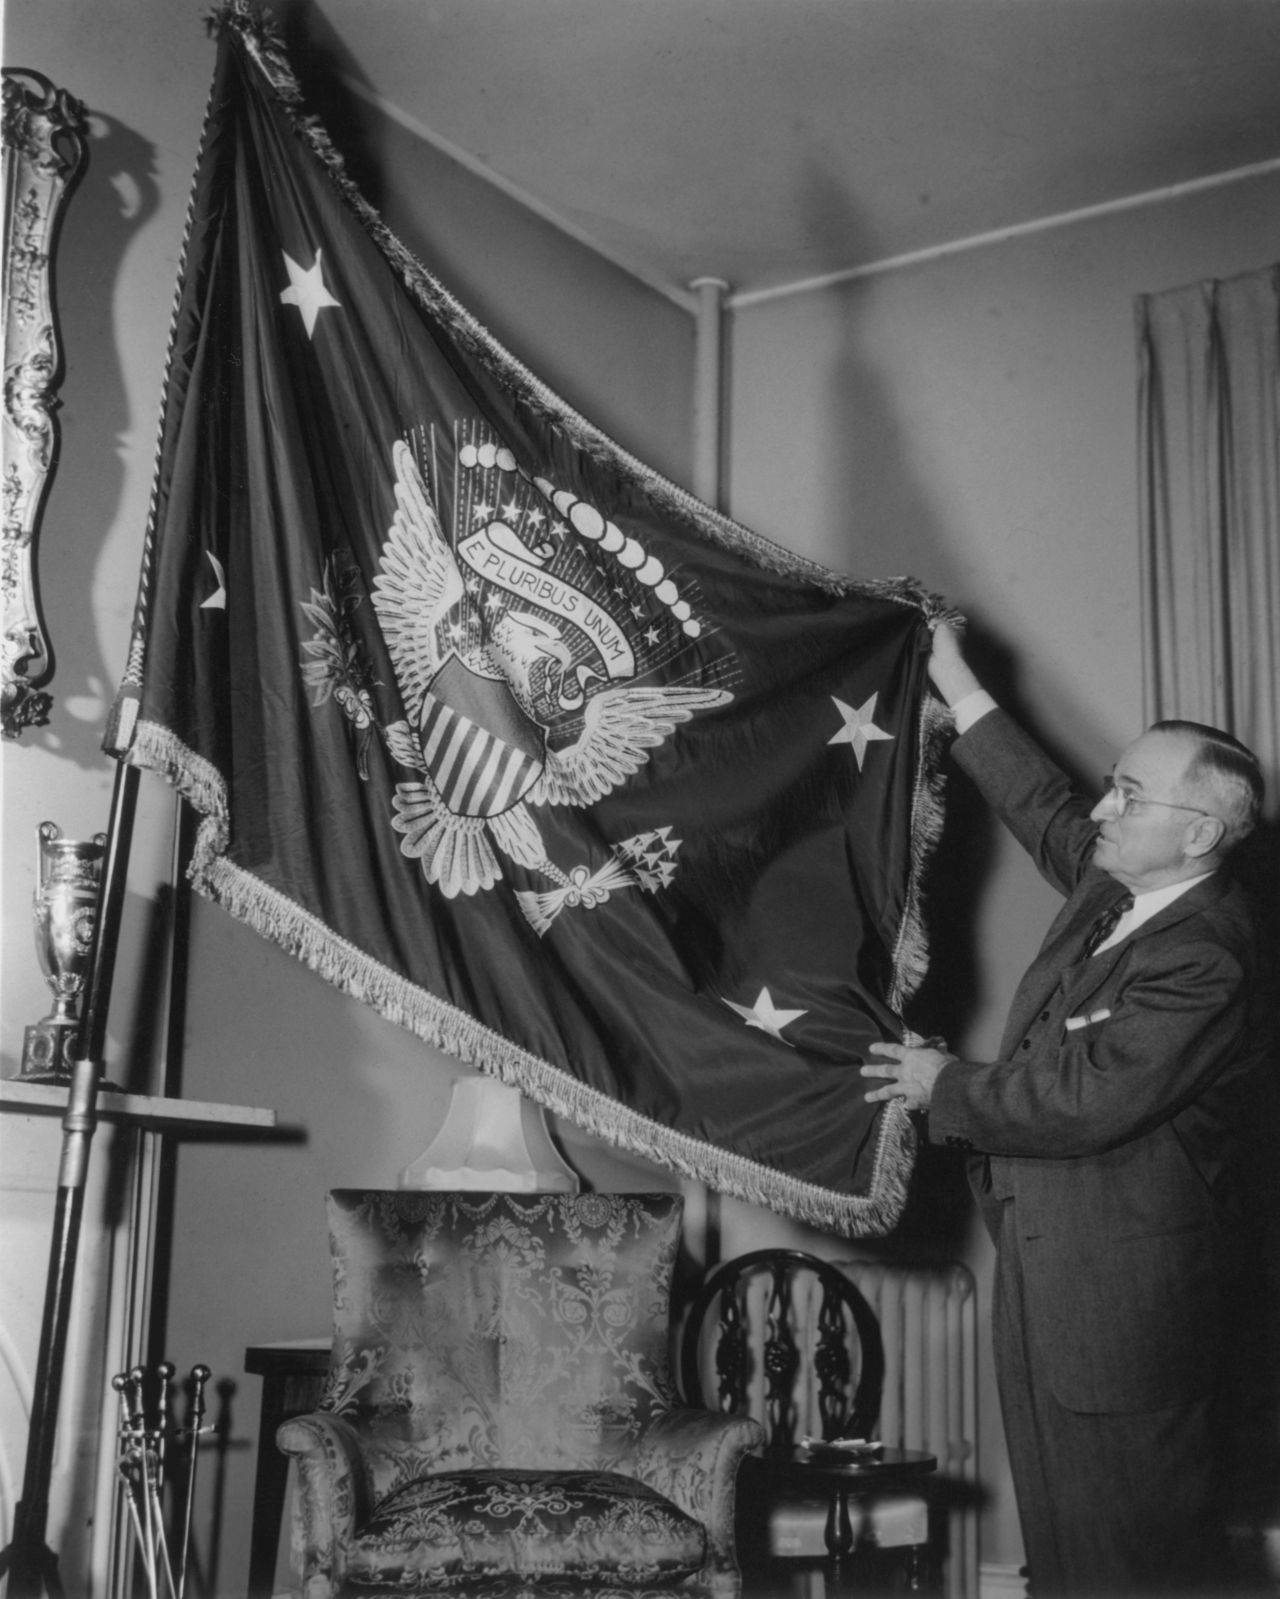 Truman holds a flag bearing the Seal of the United States, circa 1945. Truman used the slogan, "I'm just wild about Harry."